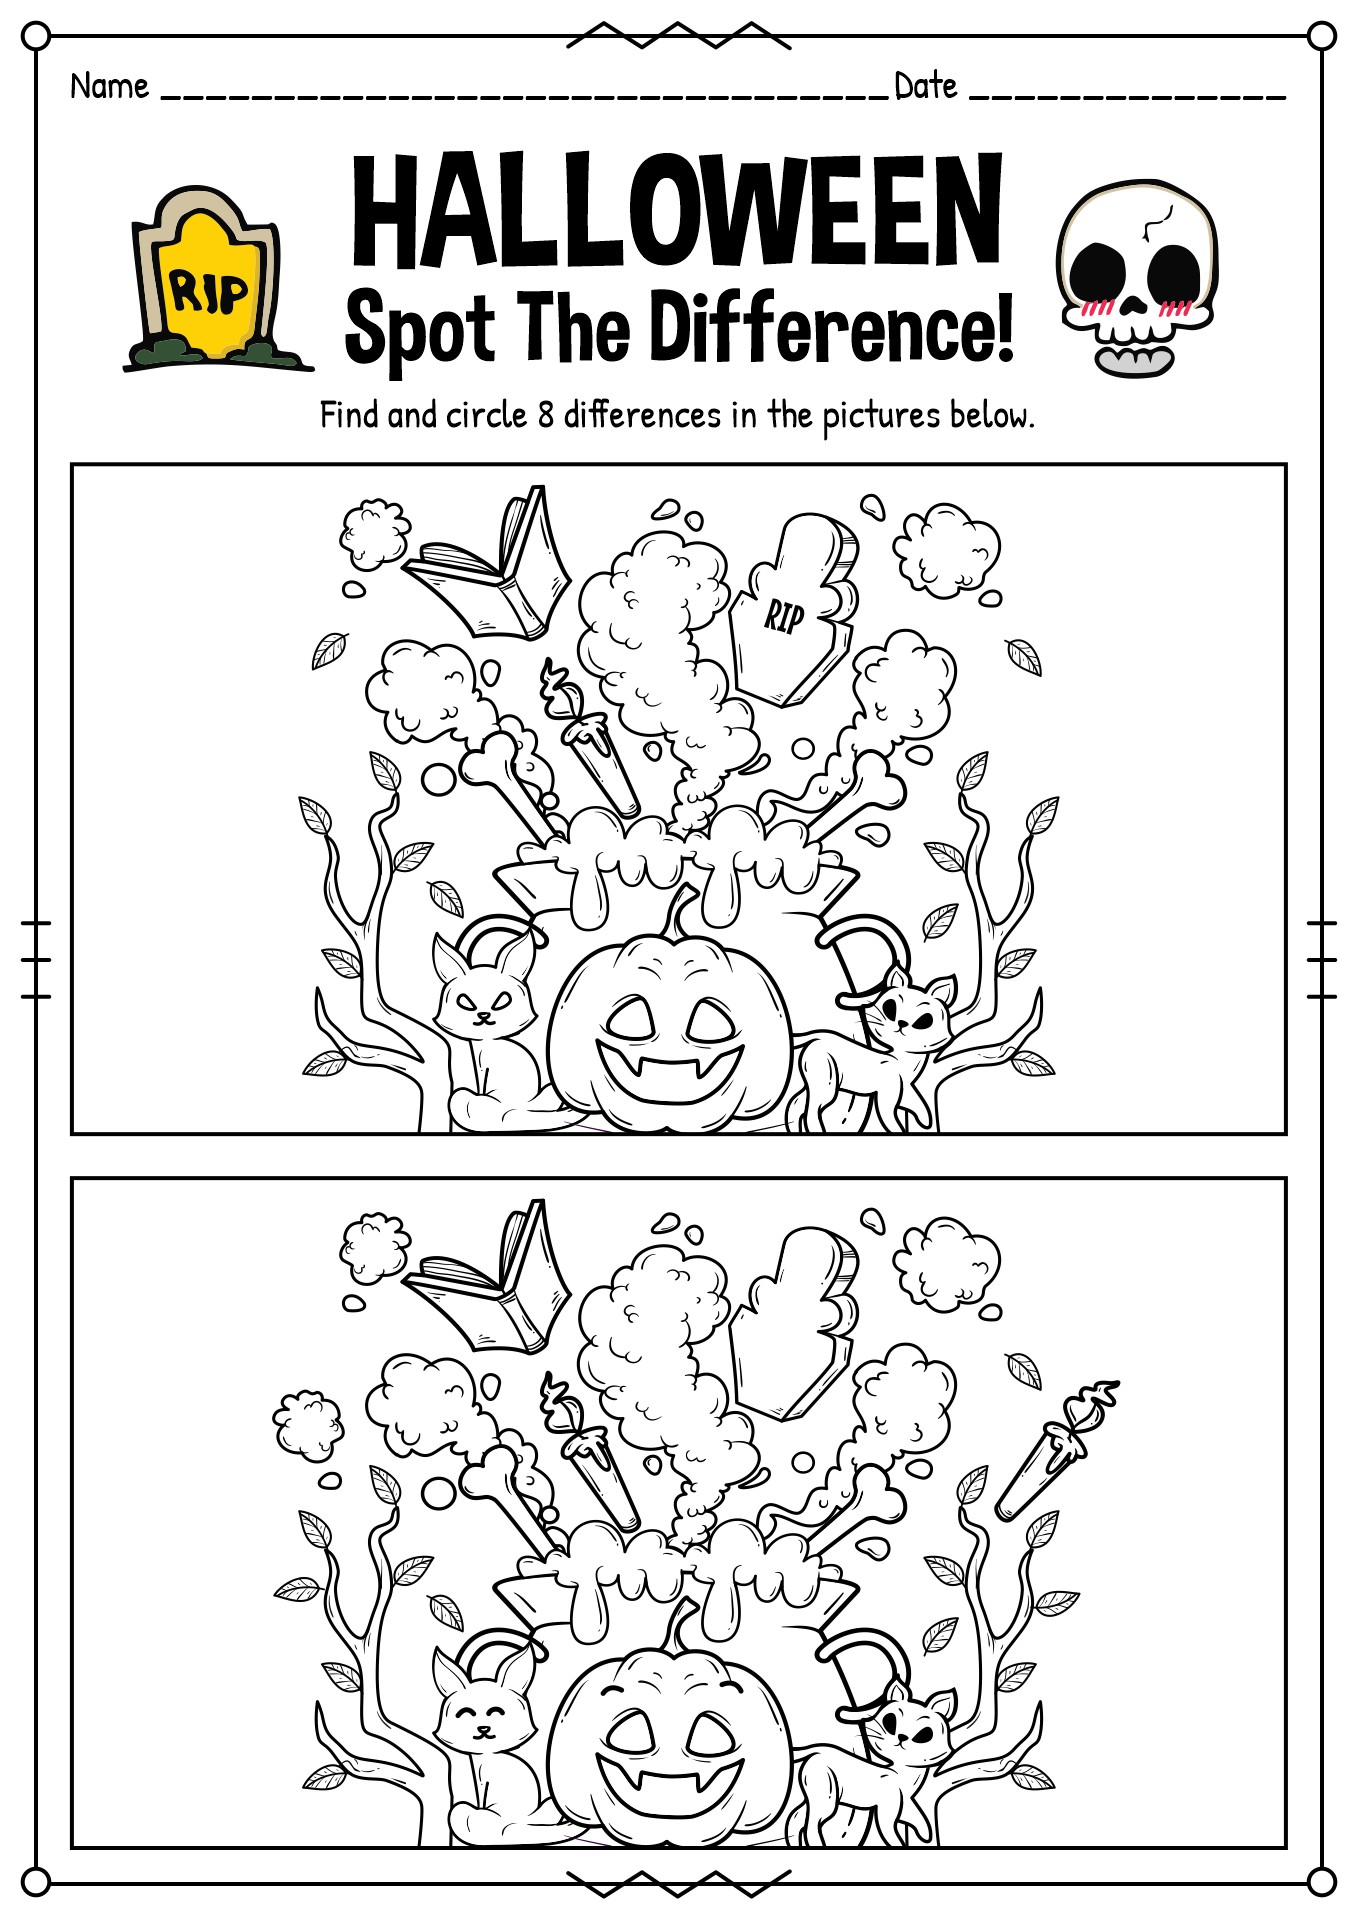 halloween-spot-the-difference-printable